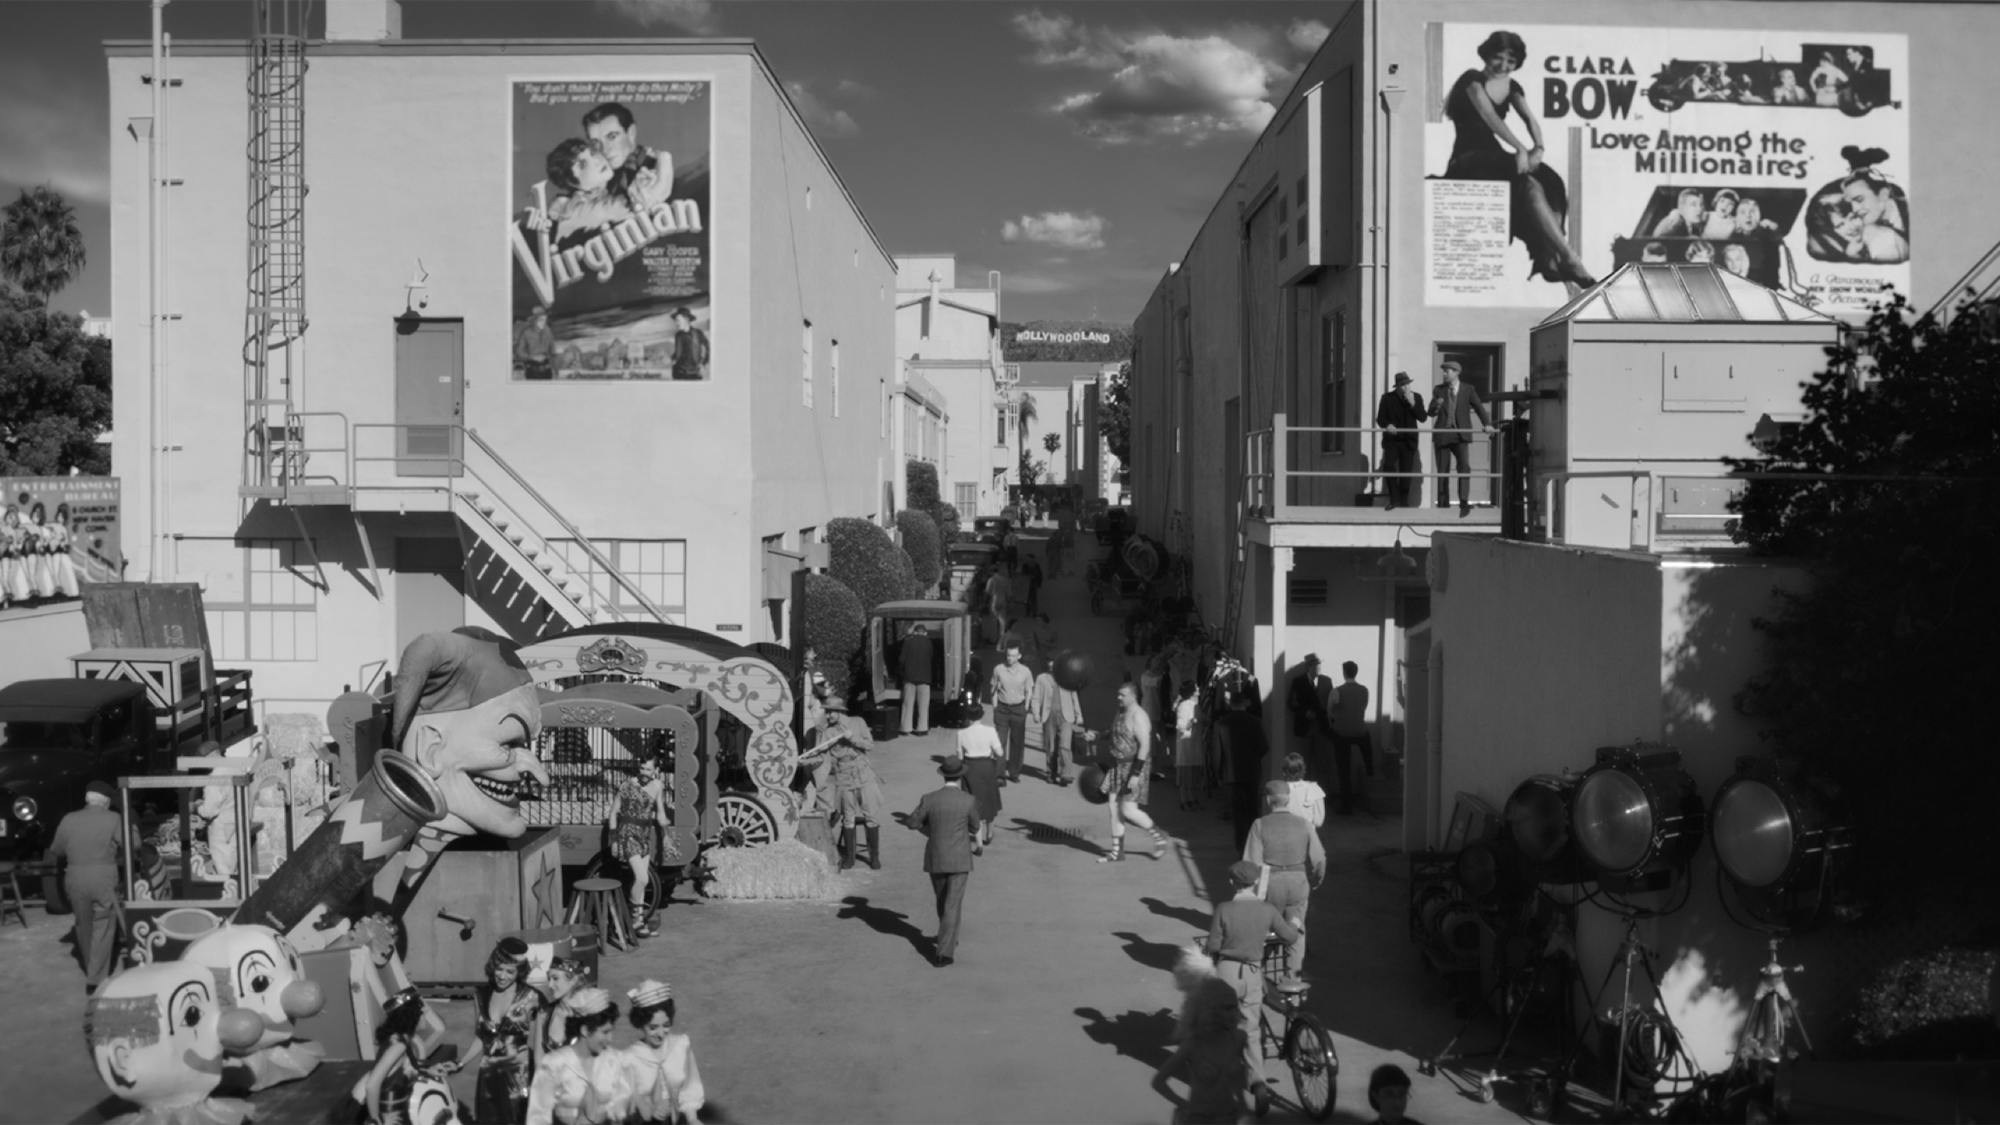 1930s Paramount Studios, recreated for Mank. We look down the gap between two rows of buildings. People wander and mingle, some in costume. A poster for the 1929 Western film The Virginian is pasted to one building. A poster for Love Among the Millionaires starring Clara Bow adorns another. 